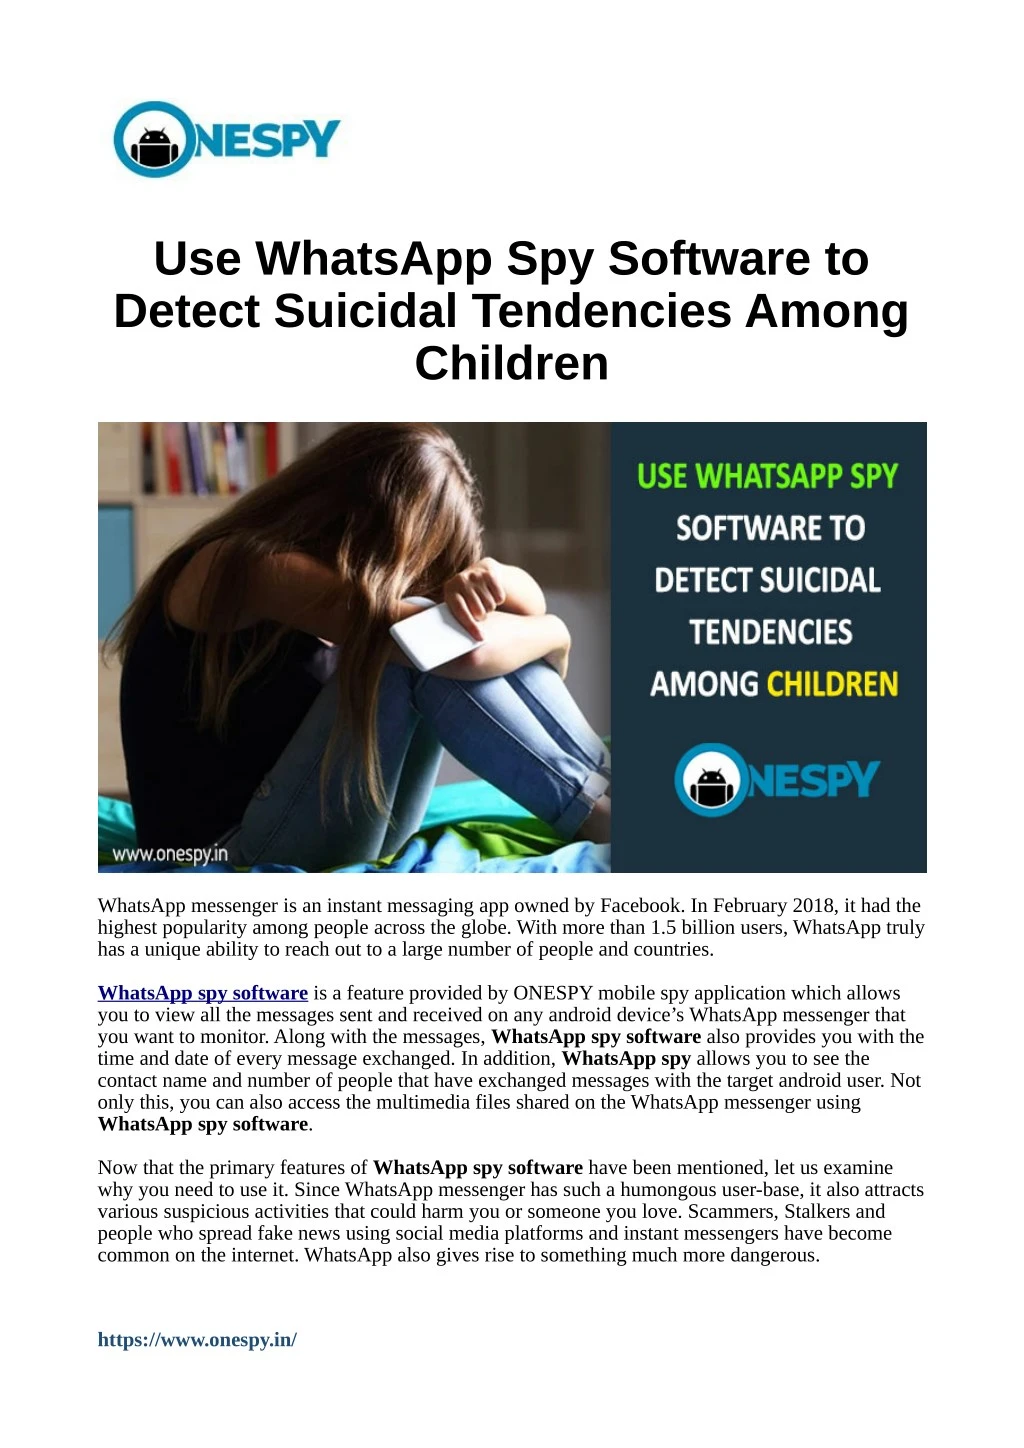 use whatsapp spy software to detect suicidal